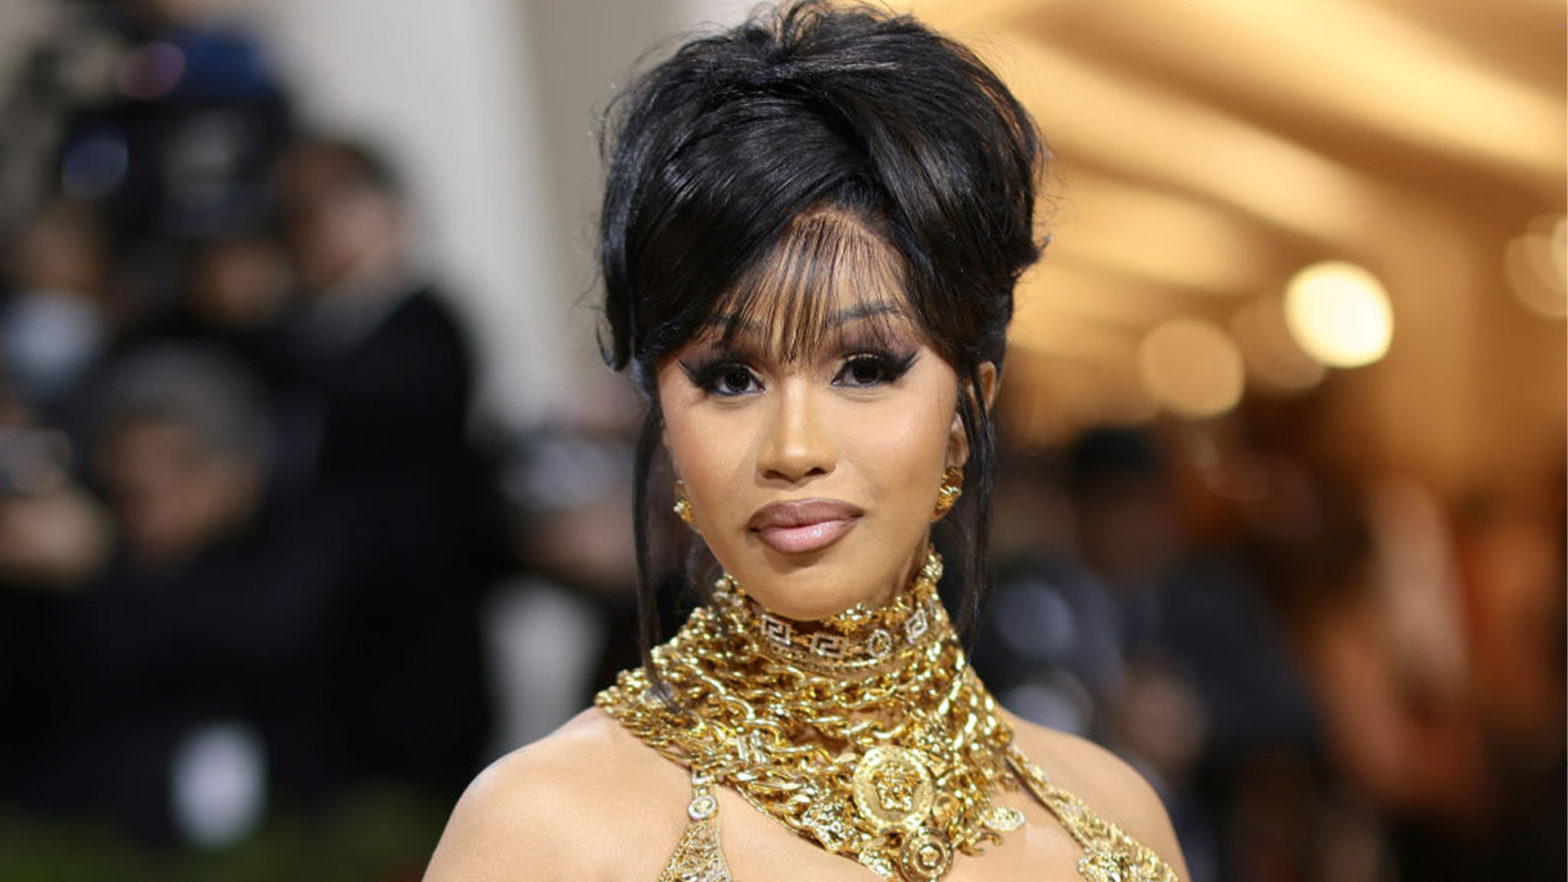 Cardi B Says She's Worth More Than $40M And Still Not Recession Proof — 'I Could Lose It Too'